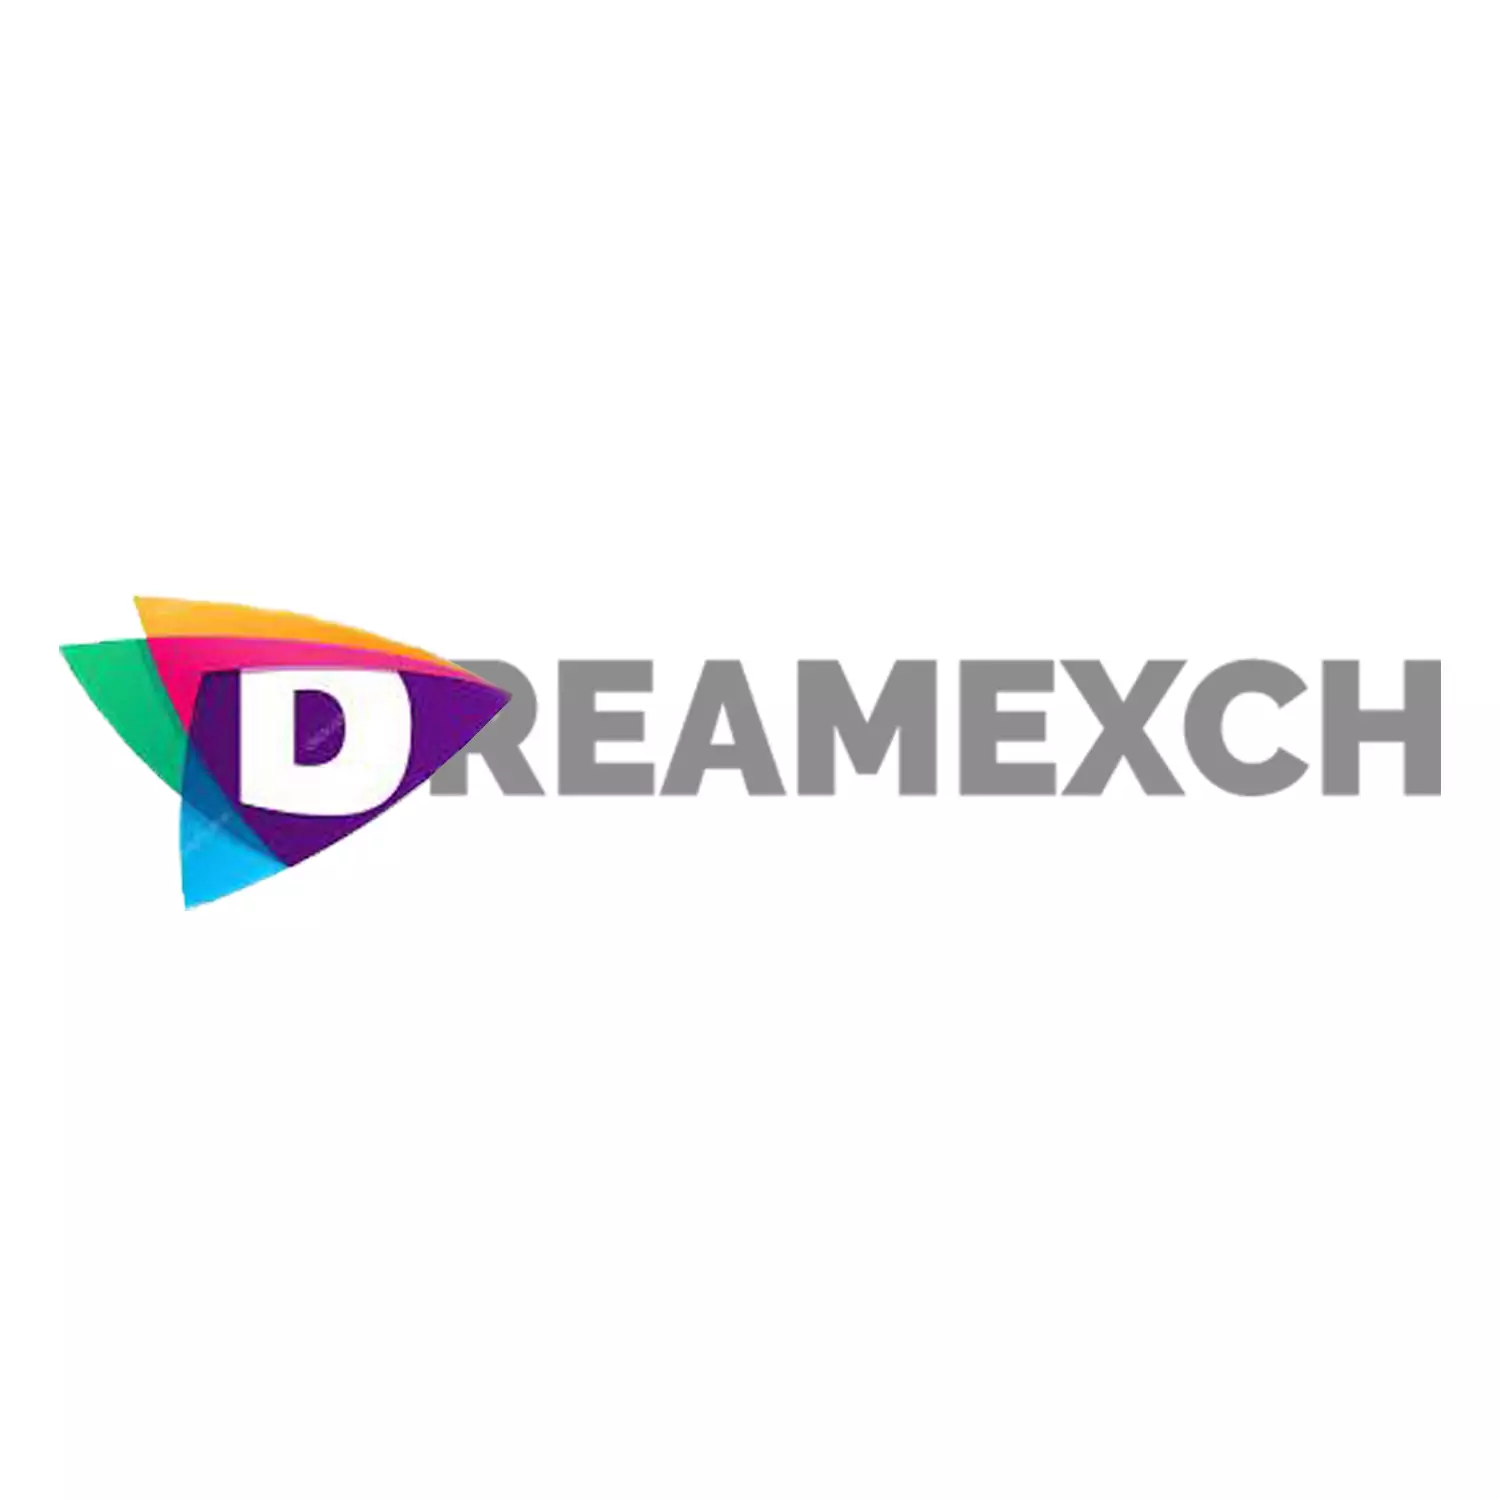 Dreamexch is not recommended for cricket betting in India.